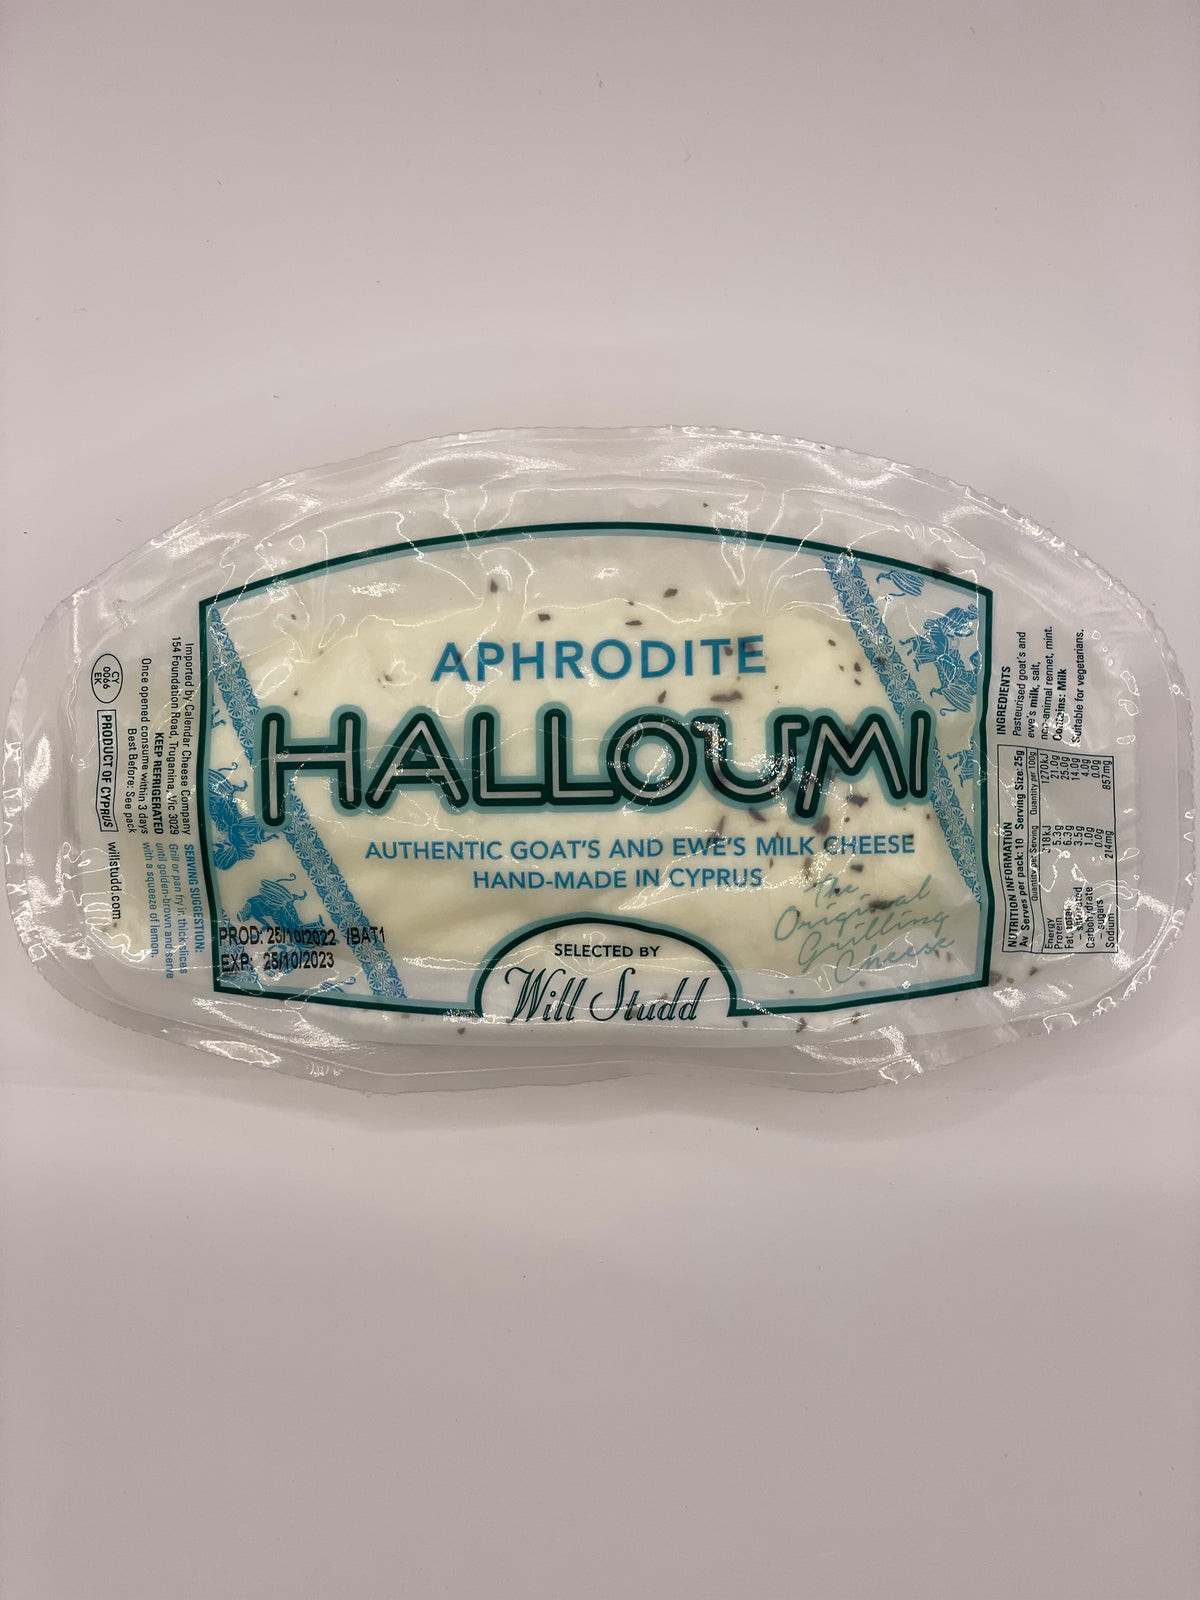 Aphrodite Goat Milk Halloumi 225g - selected by Will Studd